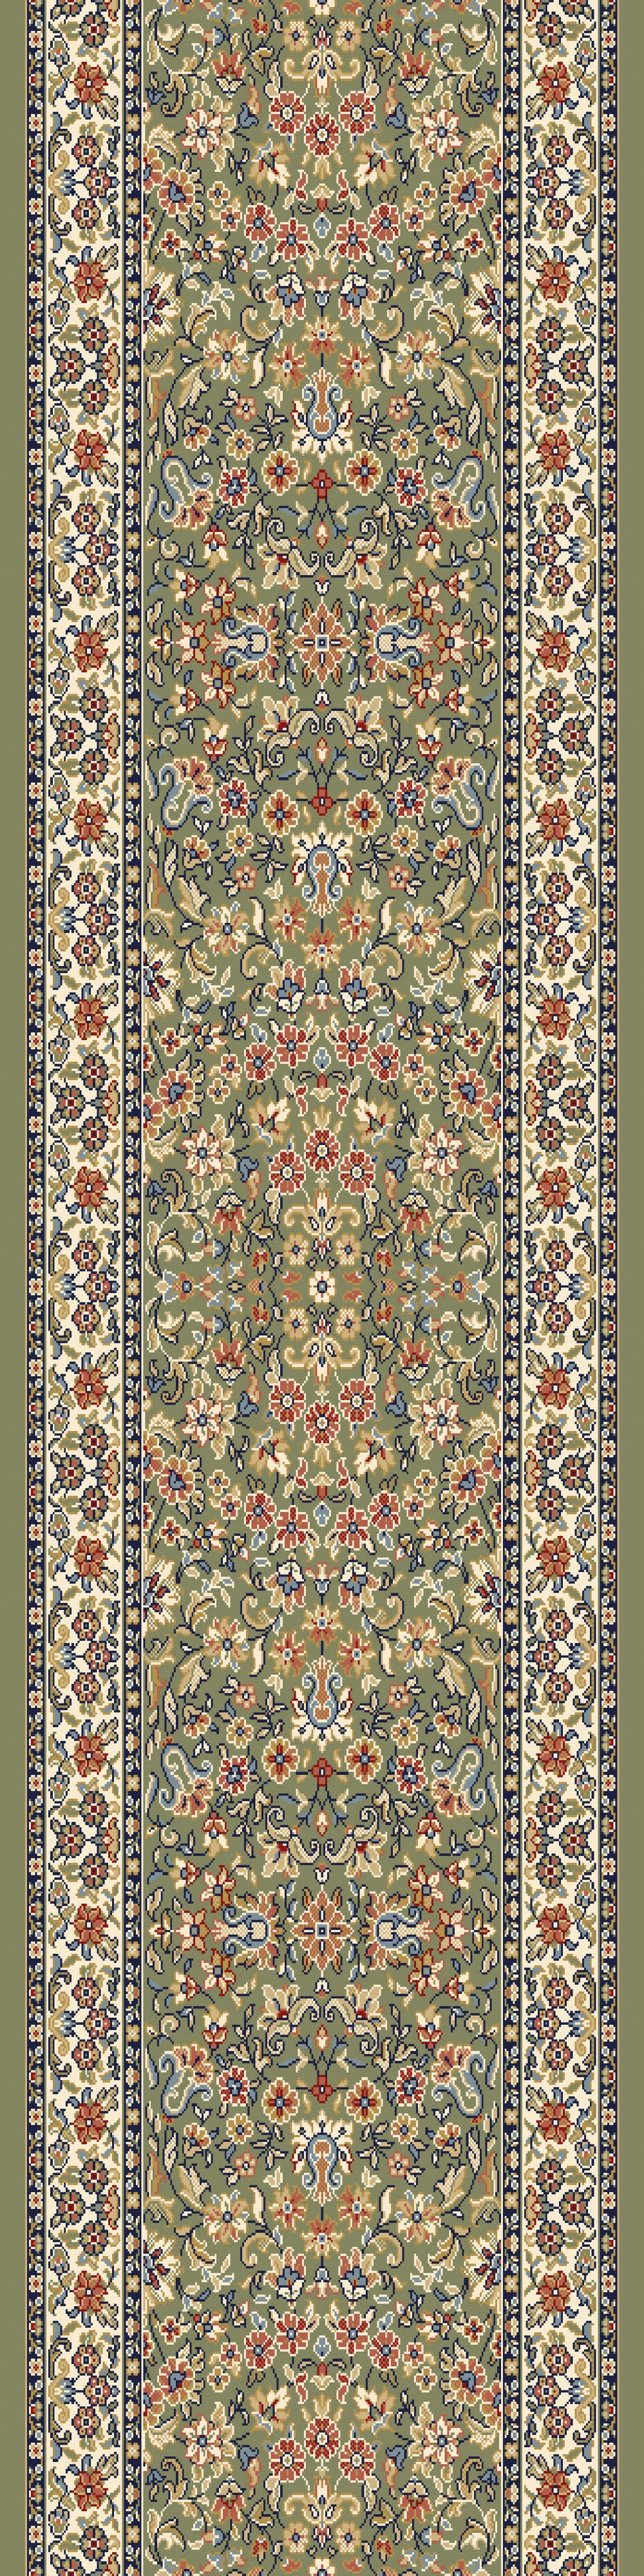 Dynamic Rugs Ancient Garden 57078 Green/Ivory